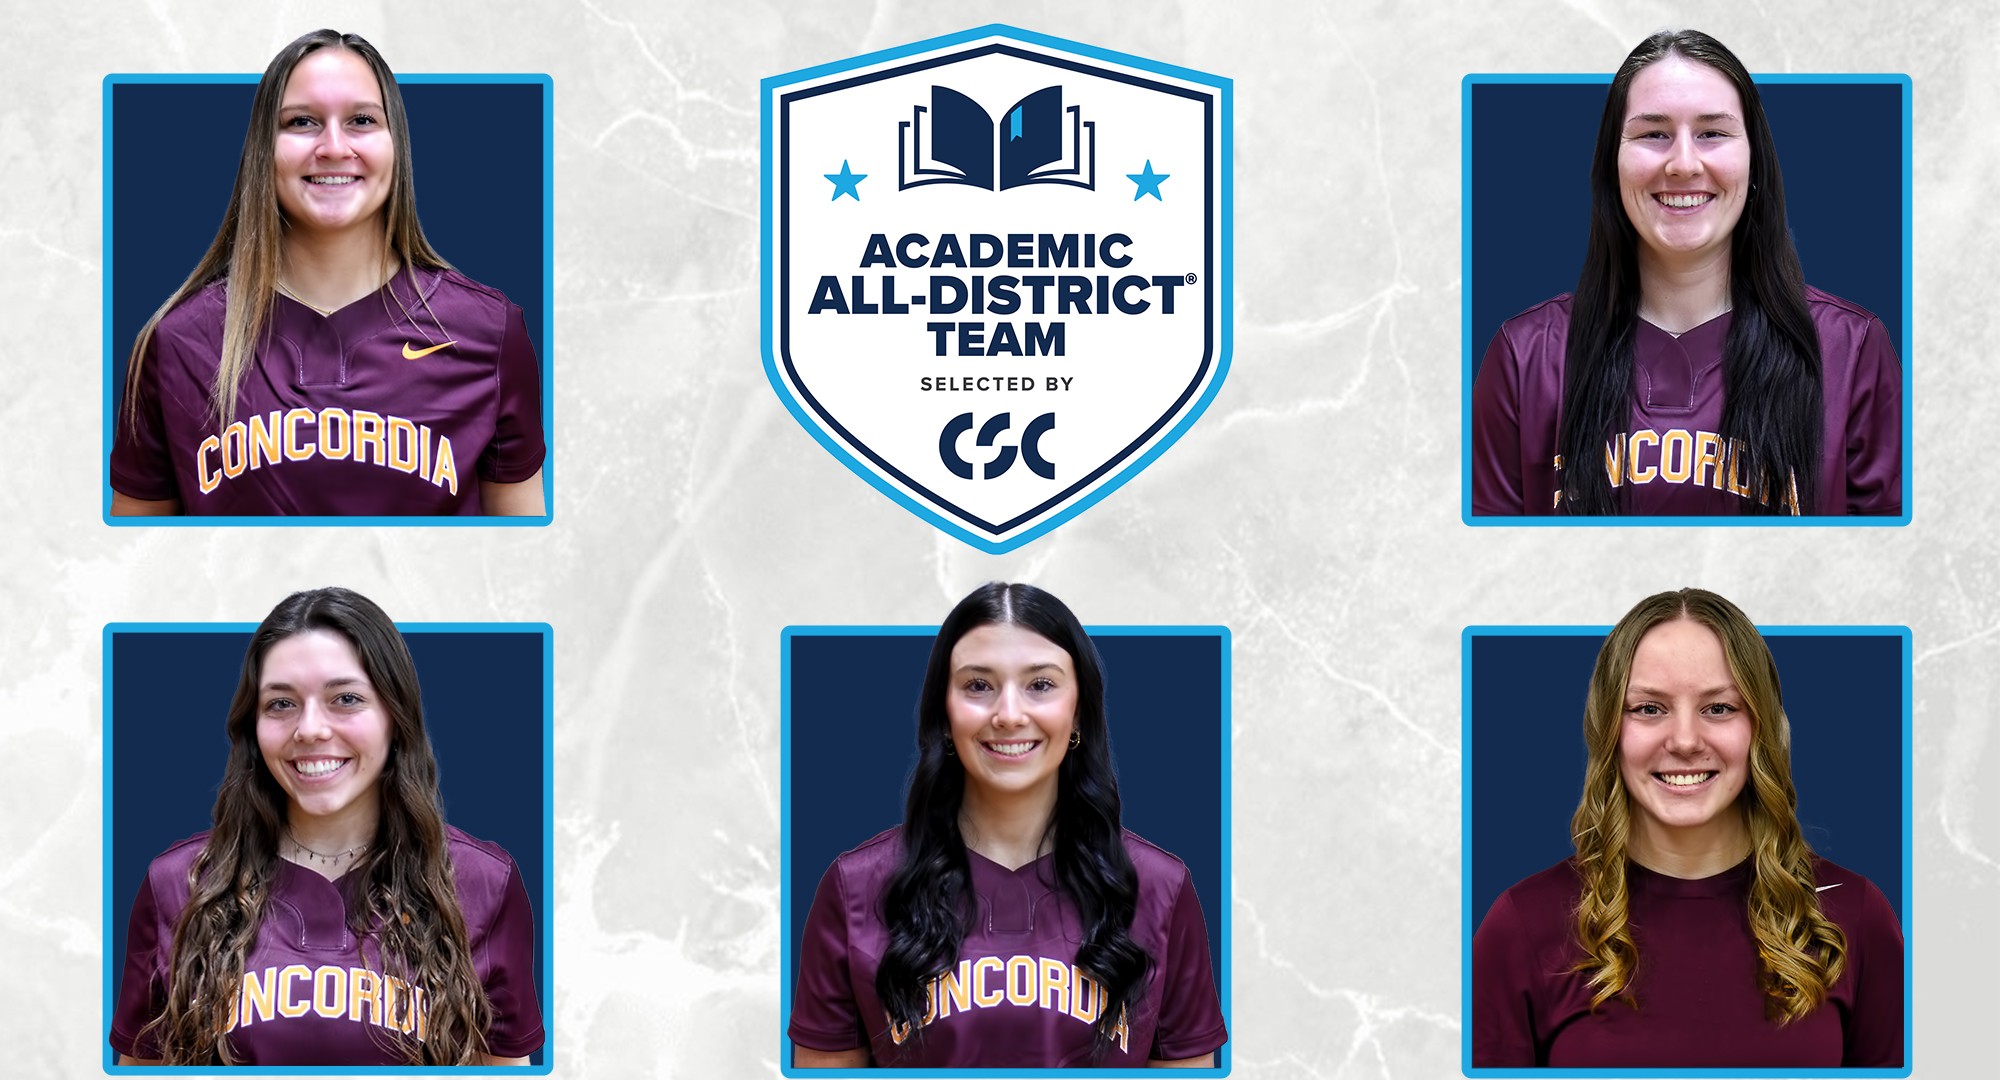 Emma Bowman, Kailee Falconer, Mallory Leitner, Danielle Lyon and Lauren Staples all received CSC Academic All-District honors.